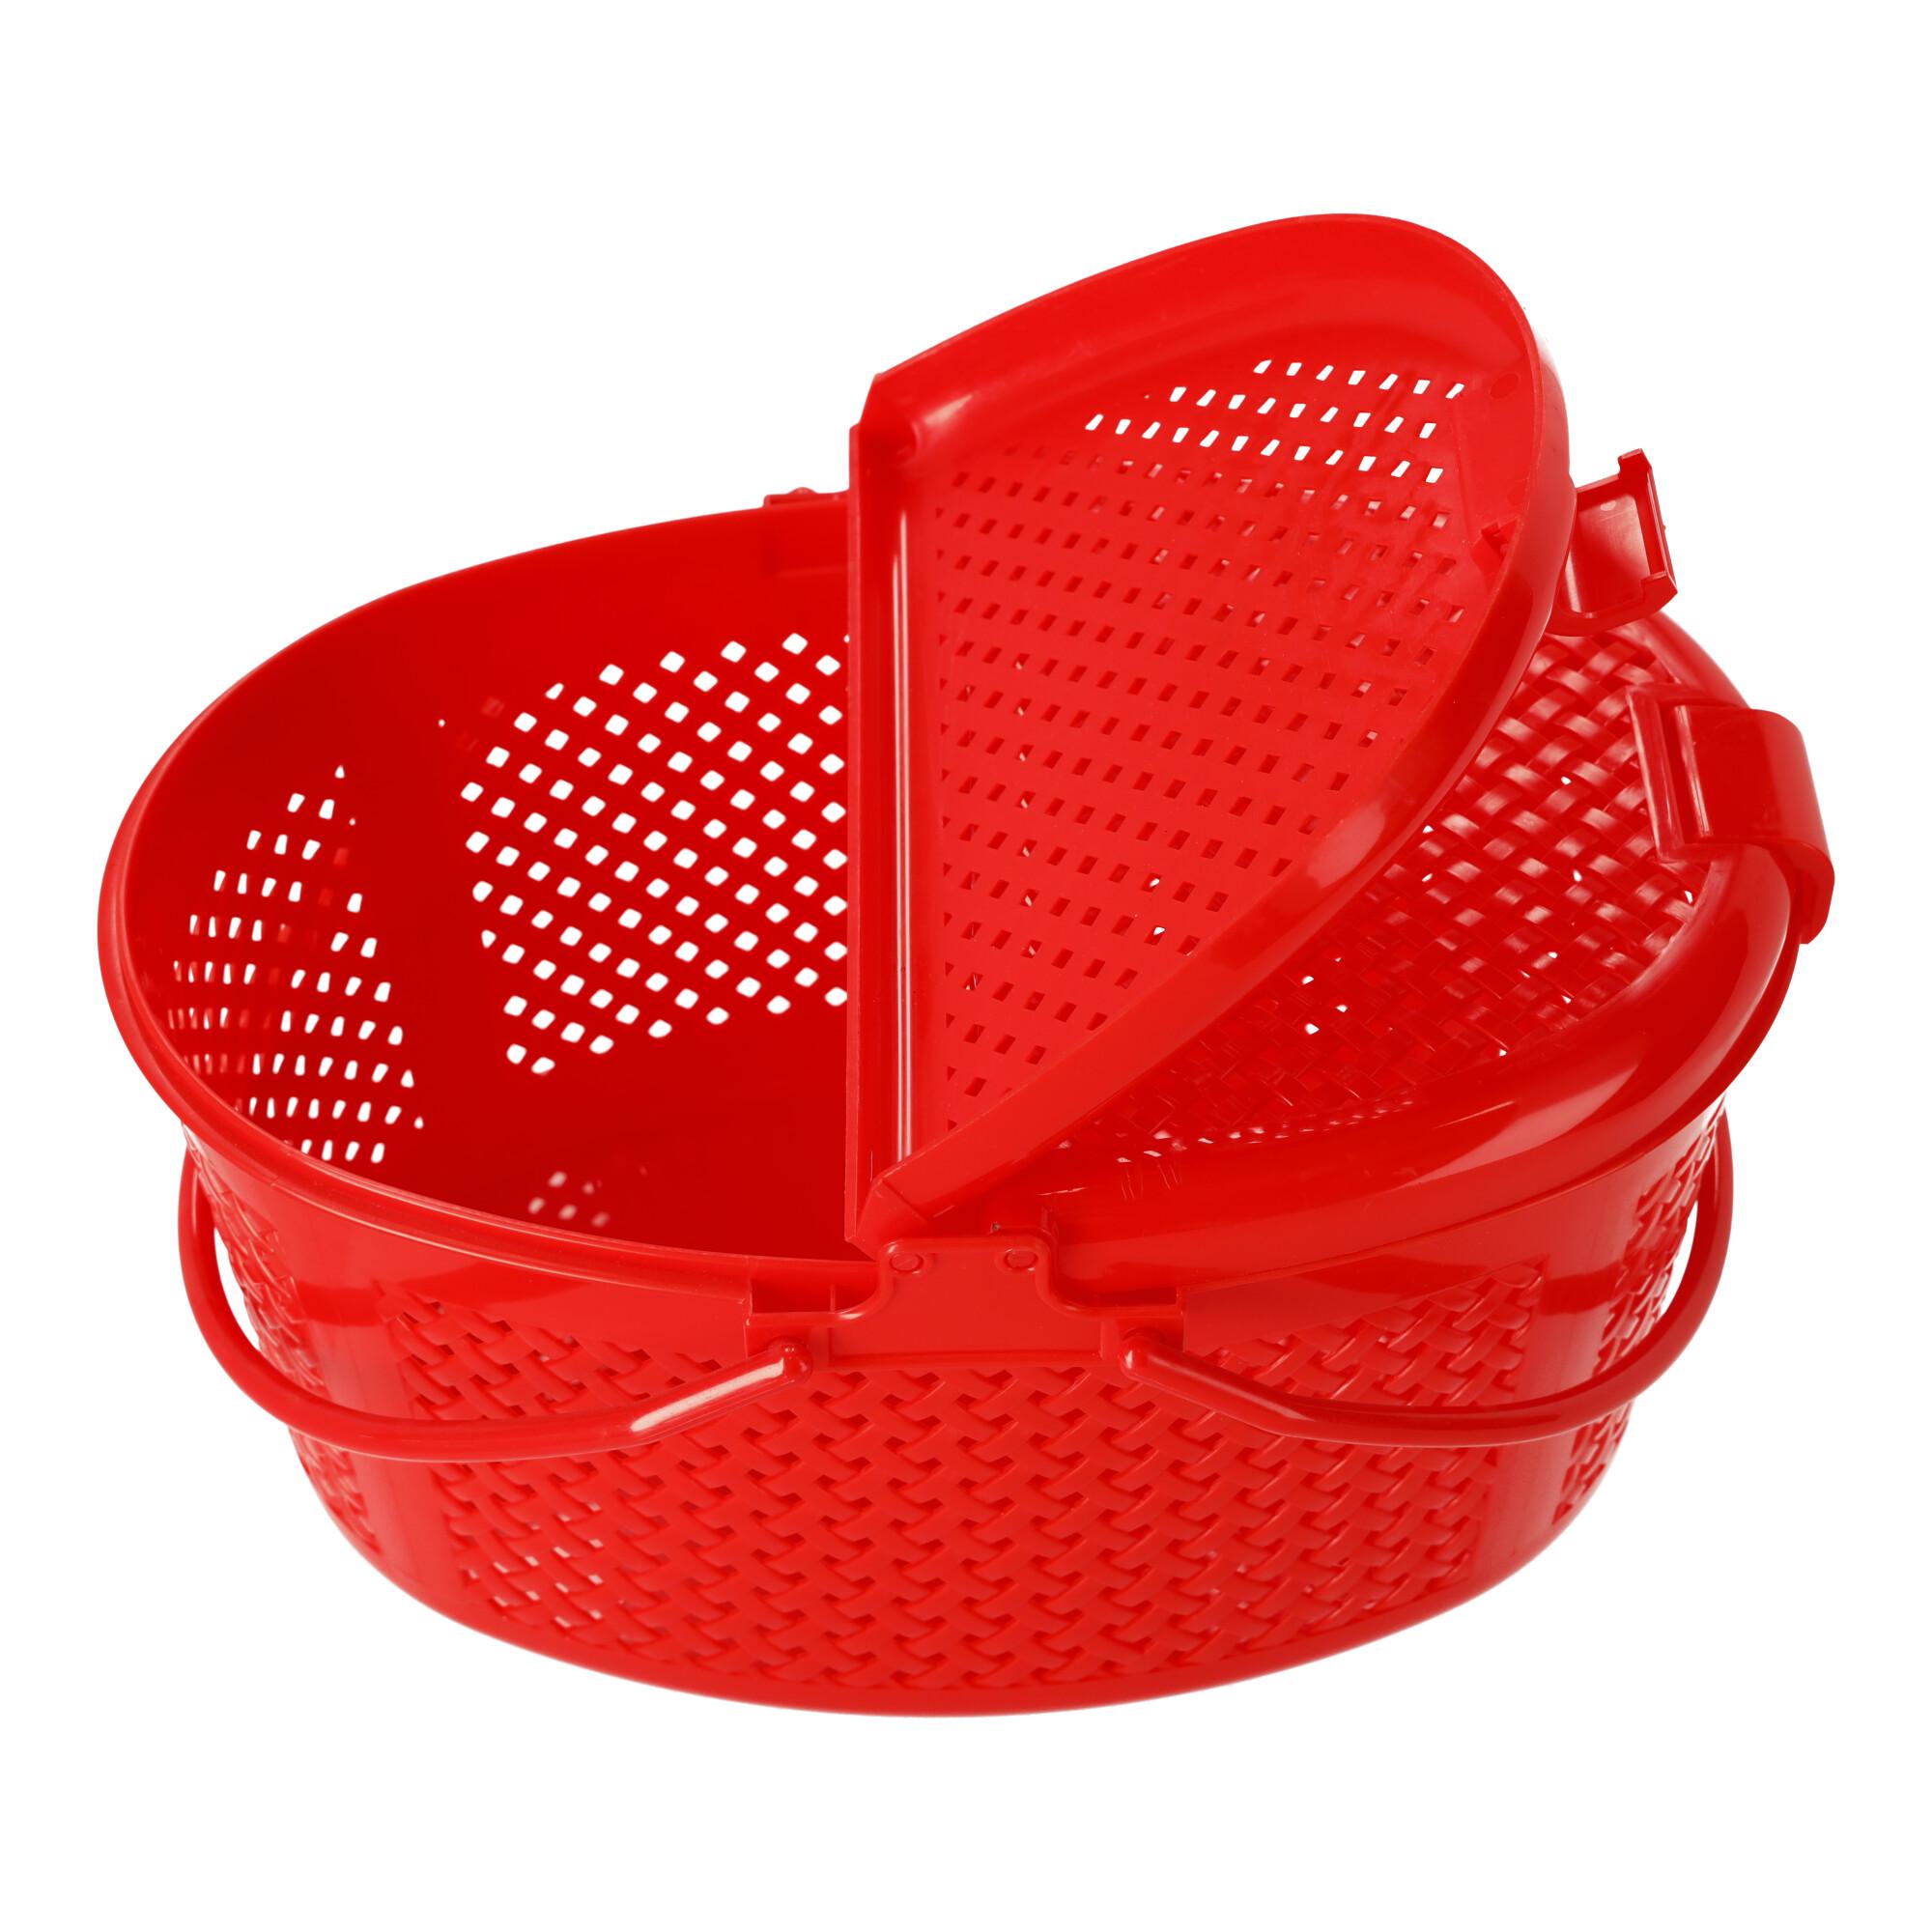 Closable oval picnic basket red, POLISH PRODUCT